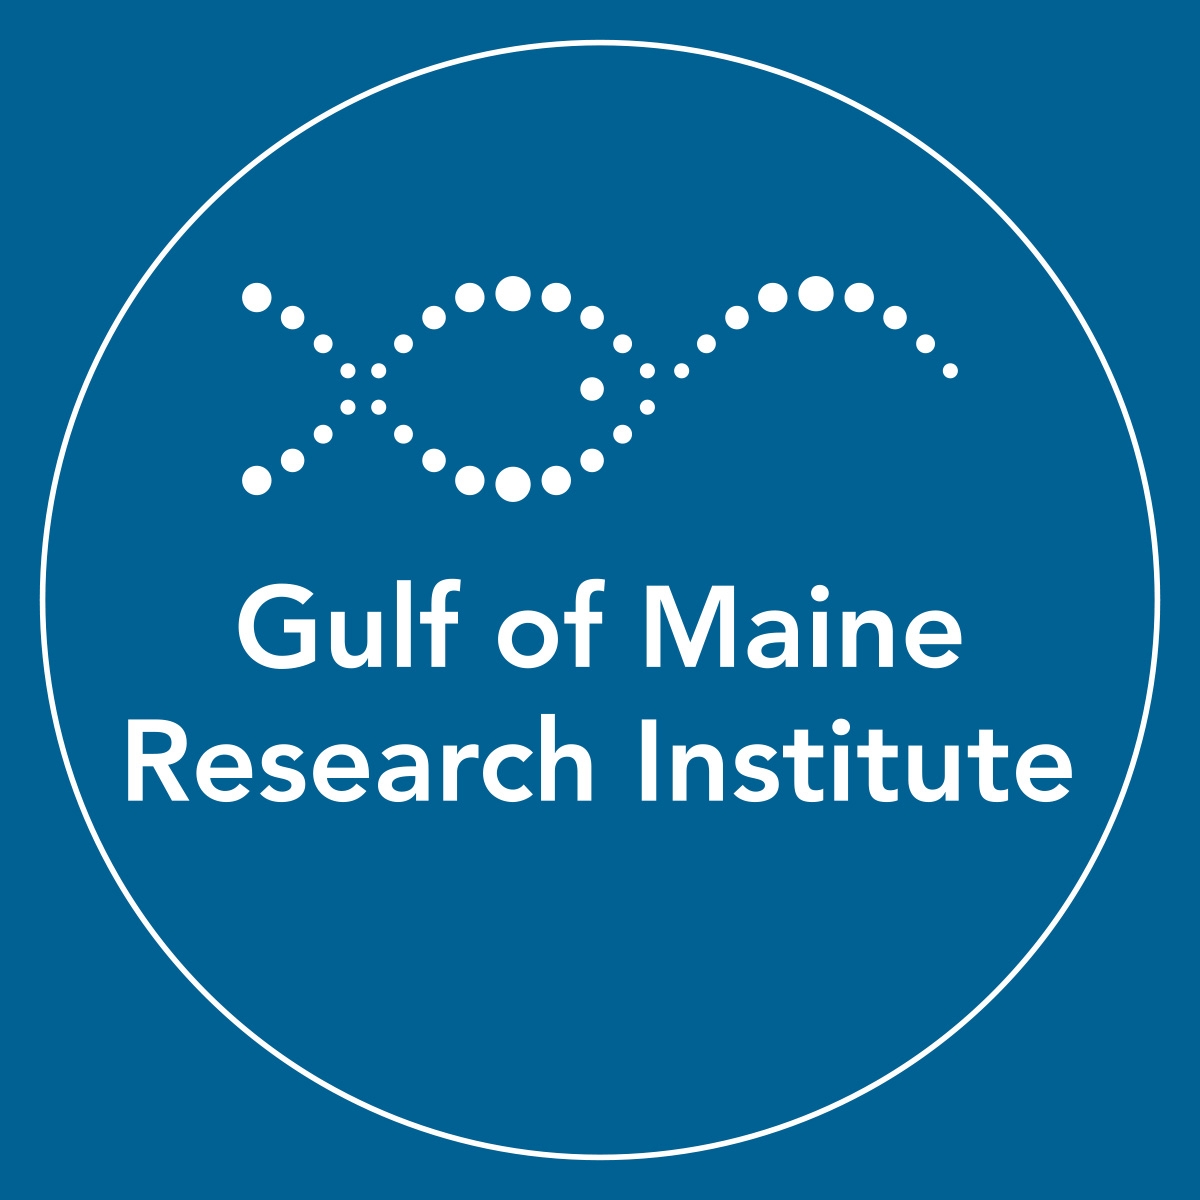 Gulf of Maine Research Institute|Museums|Travel